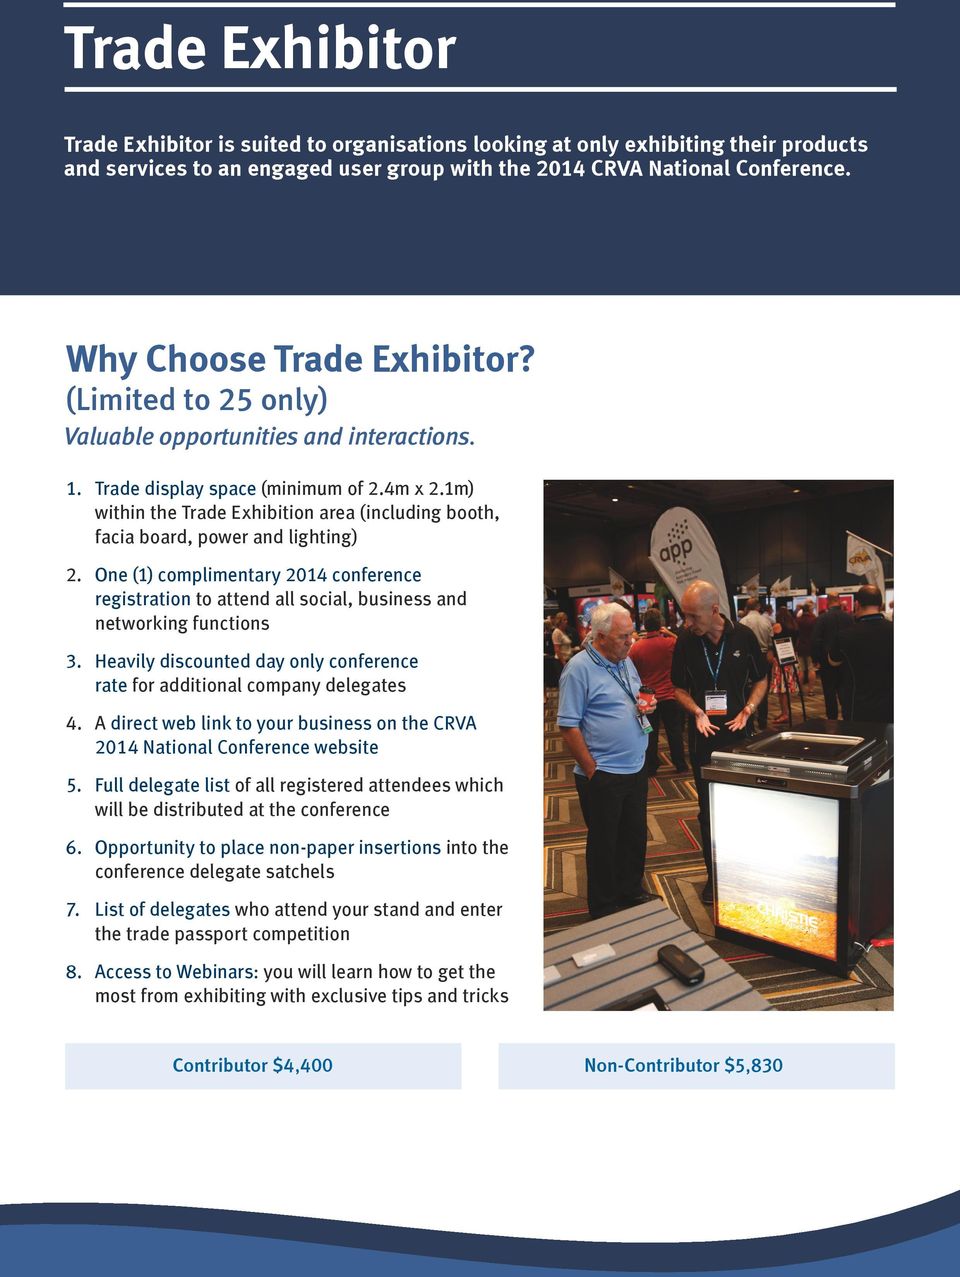 1m) within the Trade Exhibition area (including booth, facia board, power and lighting) 2. One (1) complimentary 2014 conference registration to attend all social, business and networking functions 3.